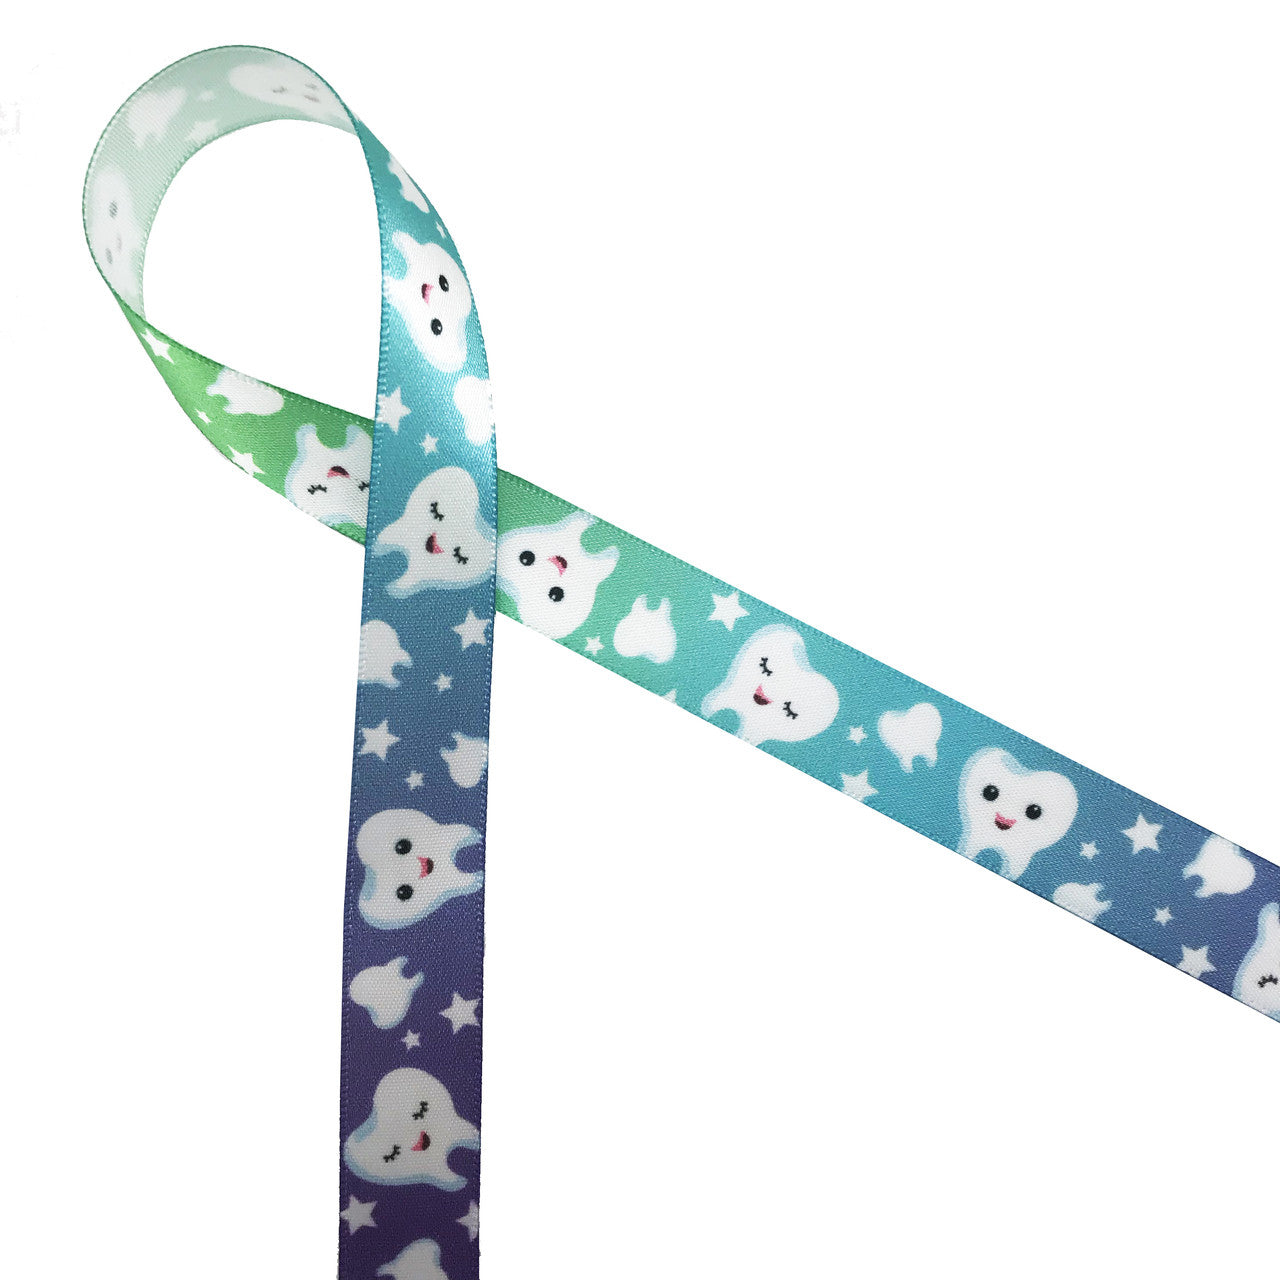 Tooth themed ribbon for a visit from the  tooth fairy or a gift for the dentist is printed on a 5/8" white single face satin ribbon with sleepy and happy molars with stars on an ombre background from green to purple!